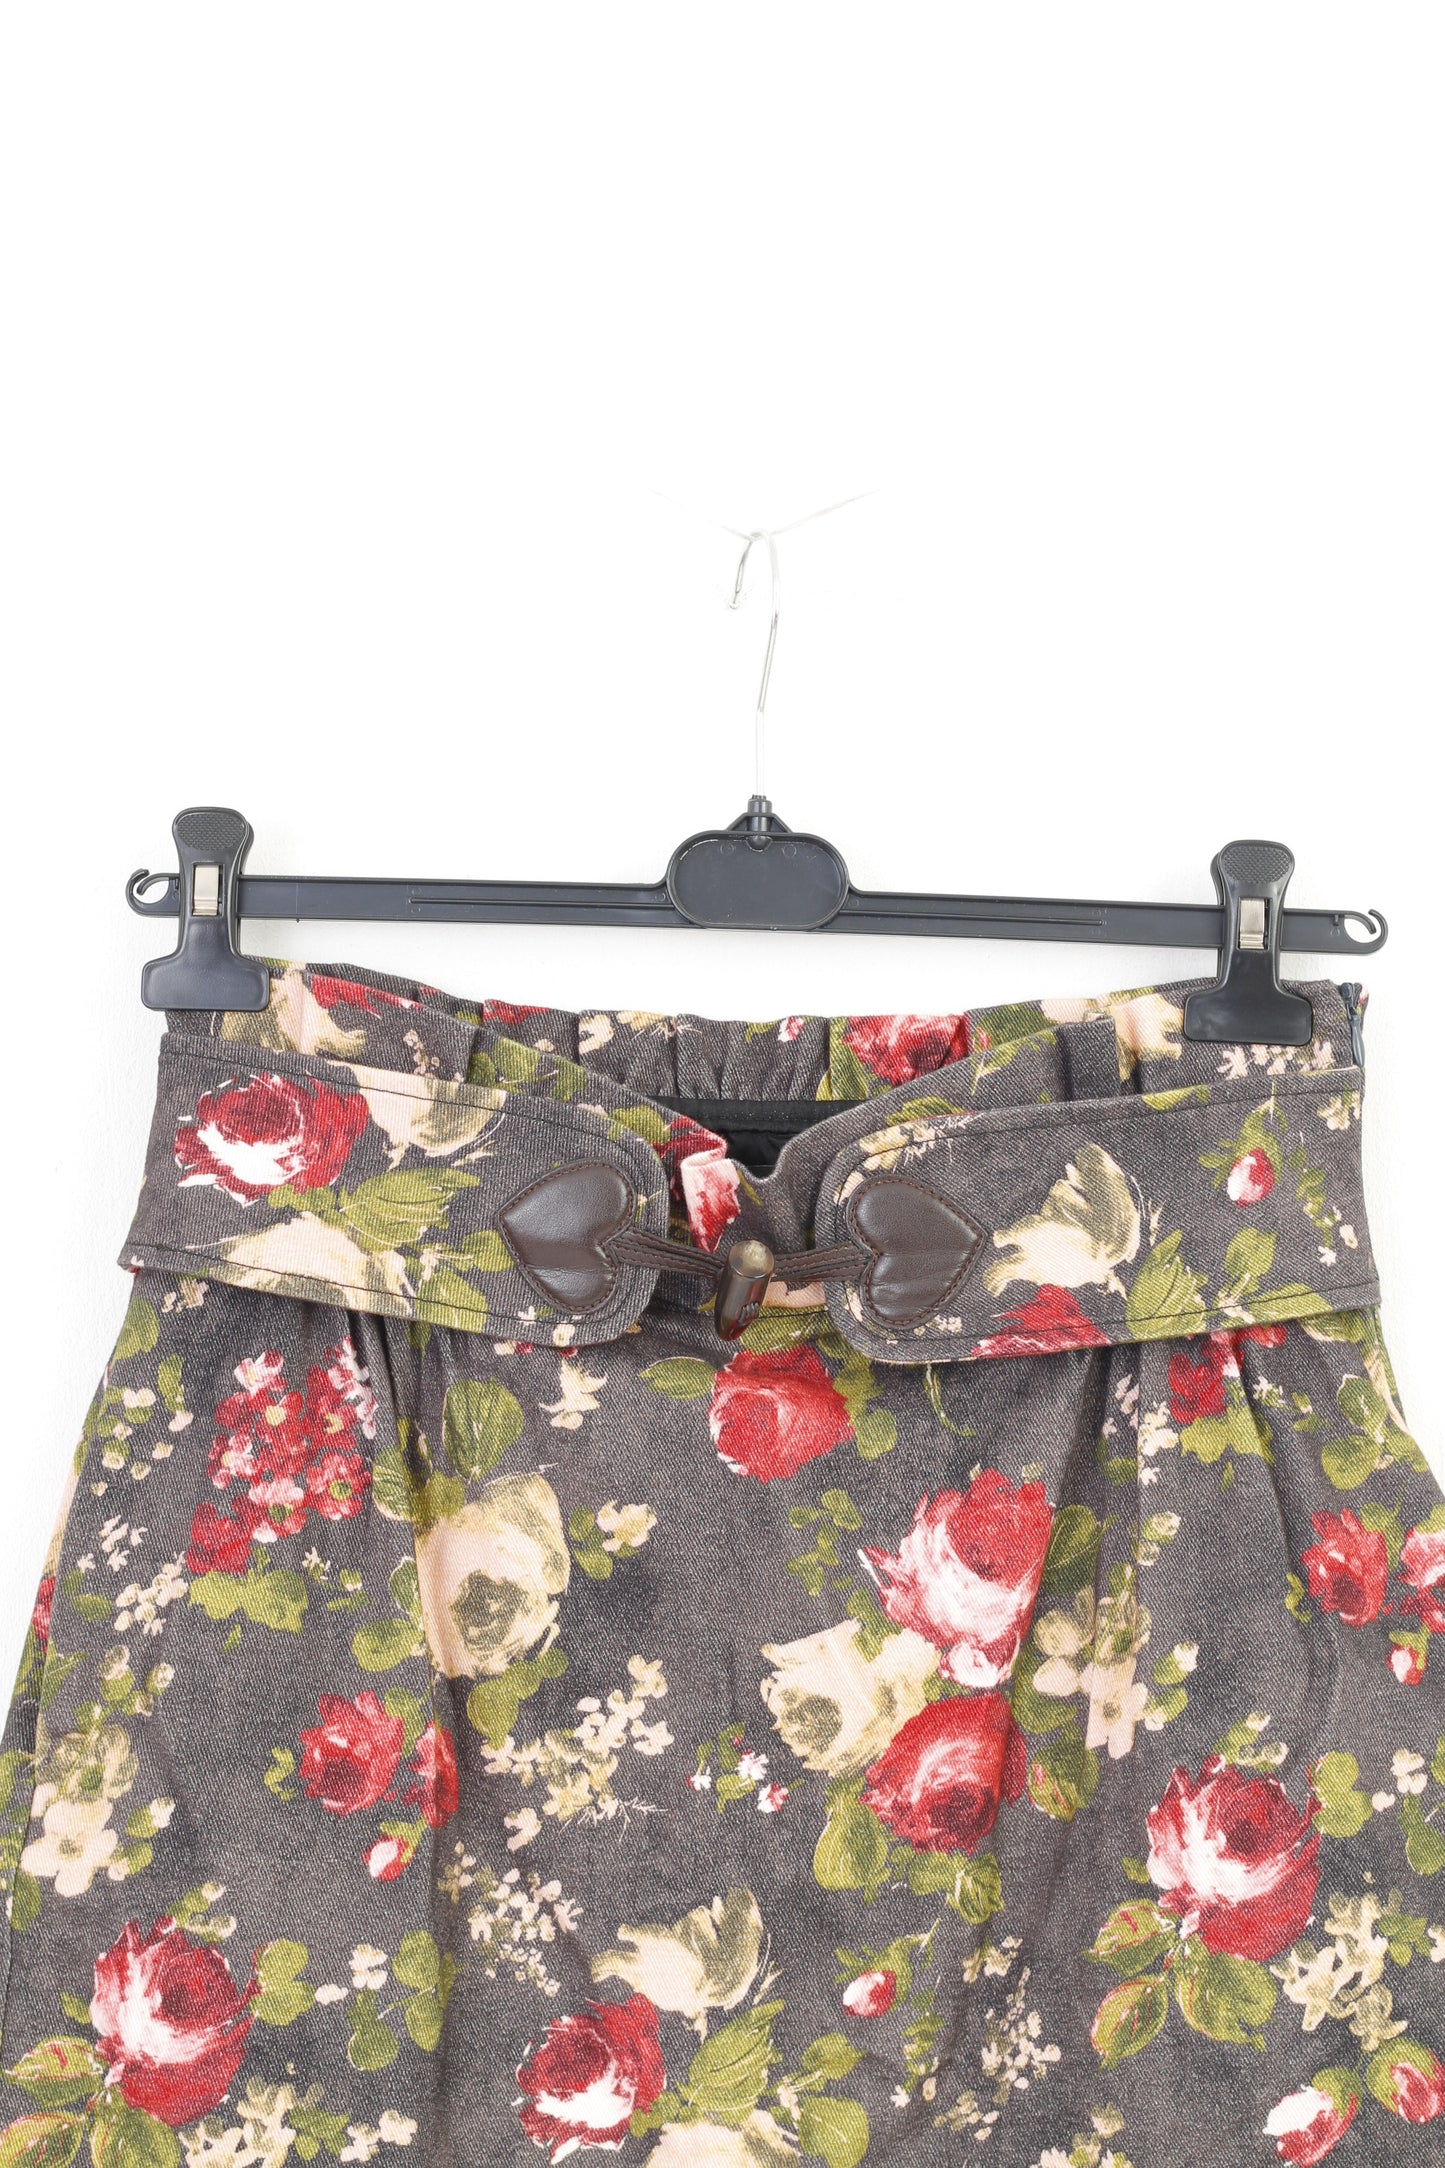 Love Moschino Women 6 S Skirt Cotton Floral Italy Multicolour Belted